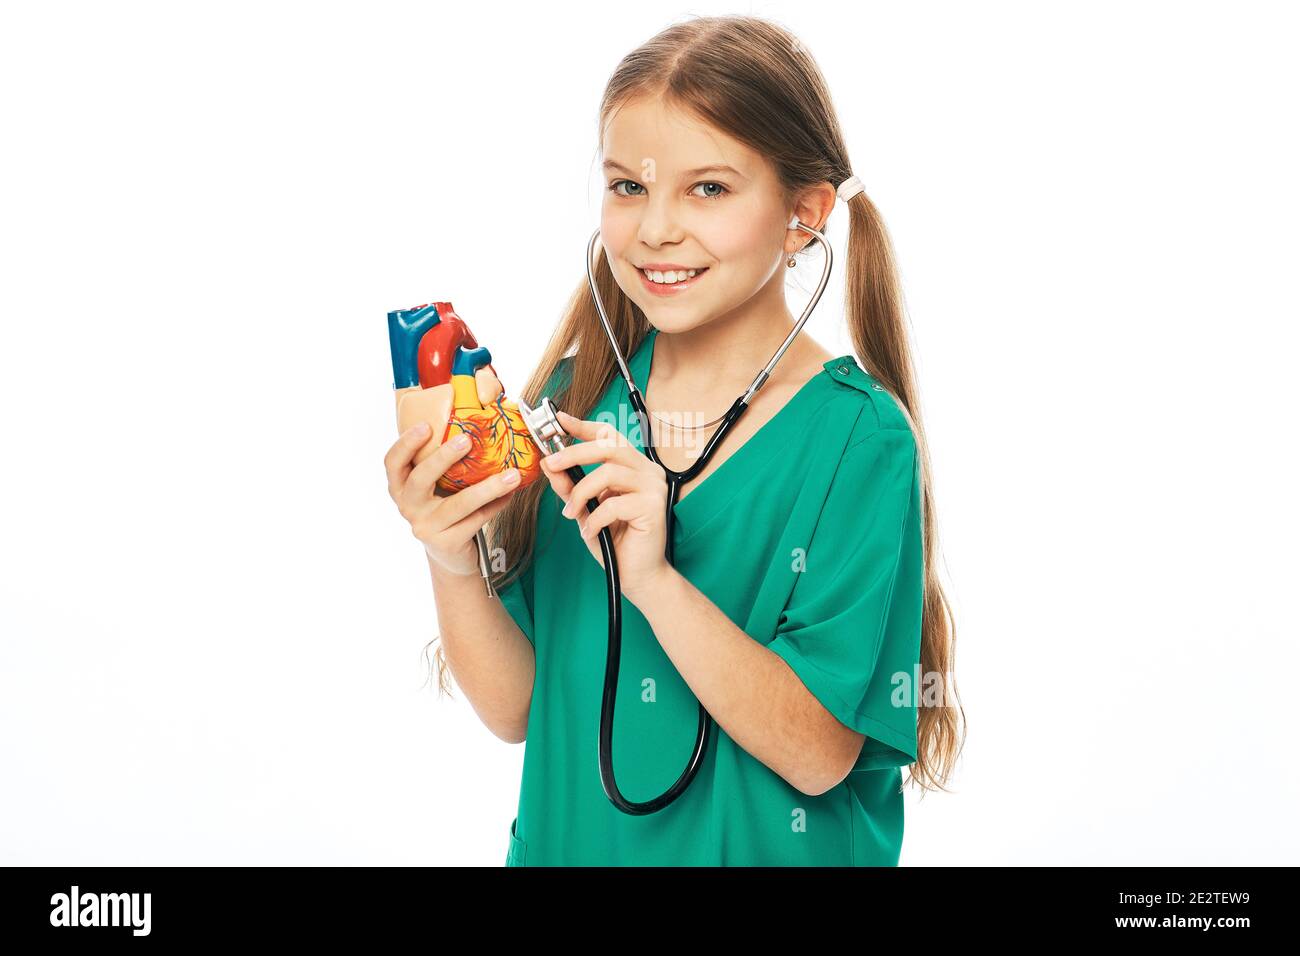 Concept of cardiac health and diagnosis of children's heart disease. Teenage girl listens to a heart model using a stethoscope Stock Photo